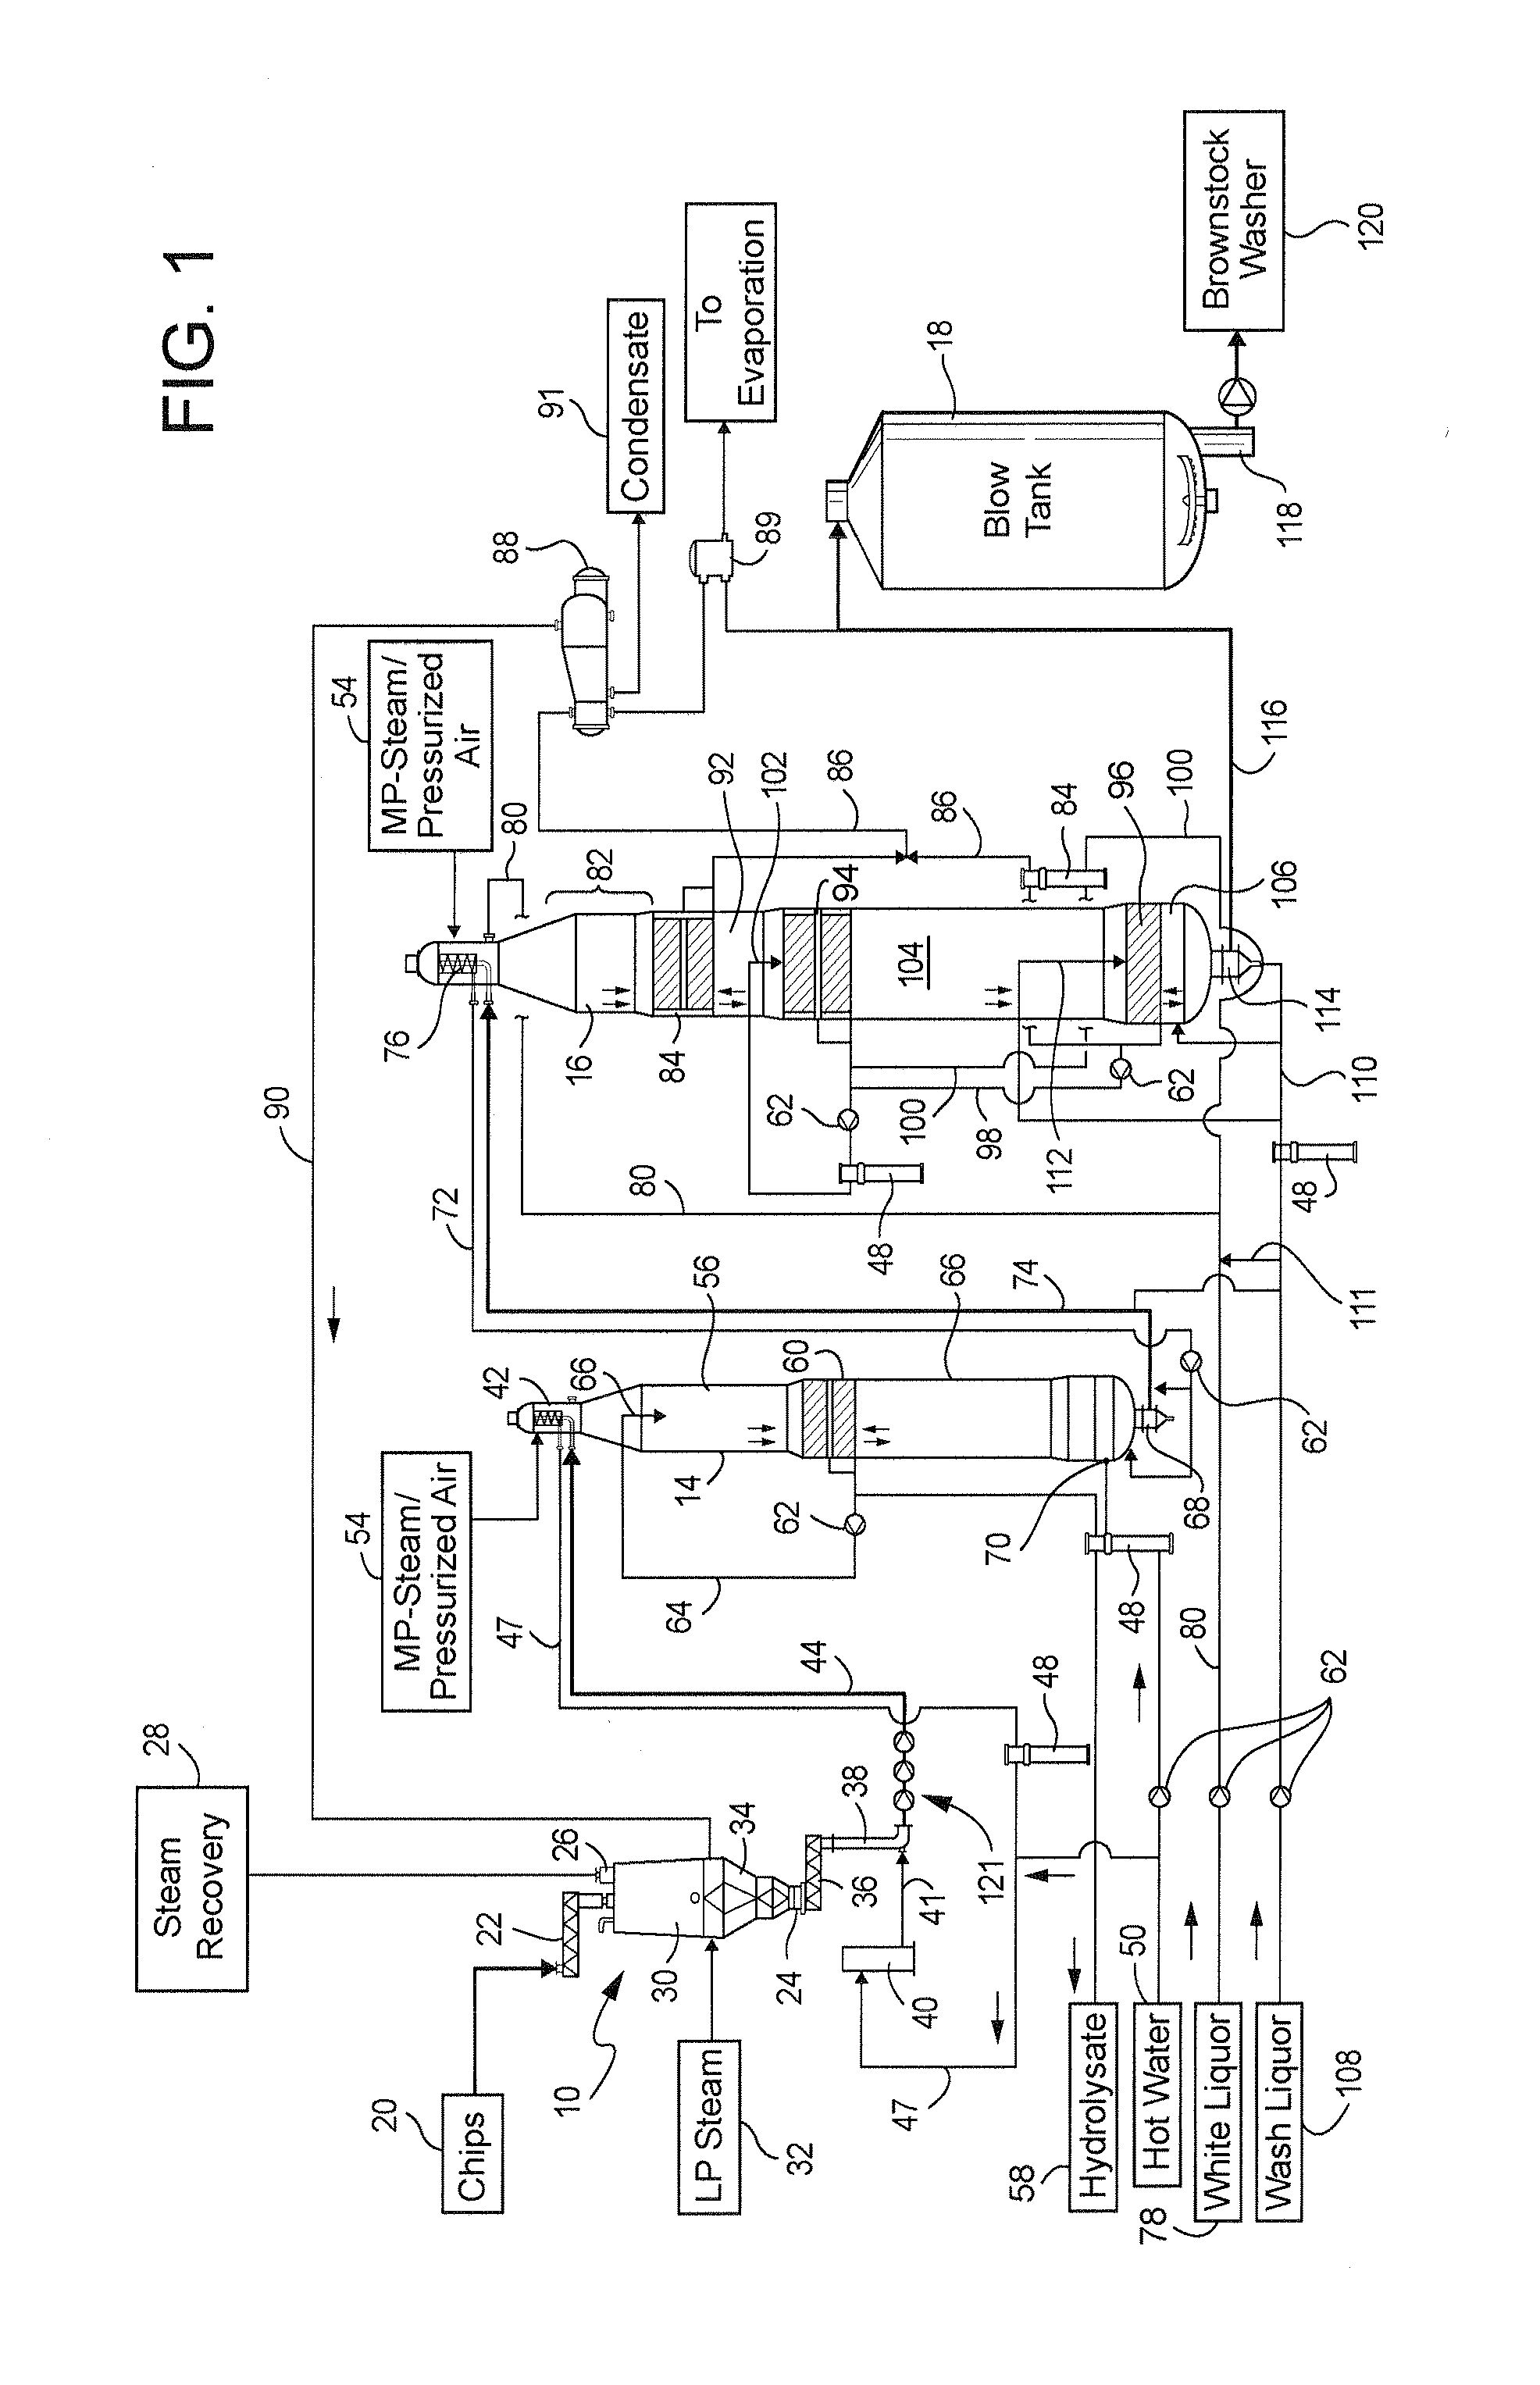 Method and apparatus to produce pulp using pre-hydrolysis and kraft cooking